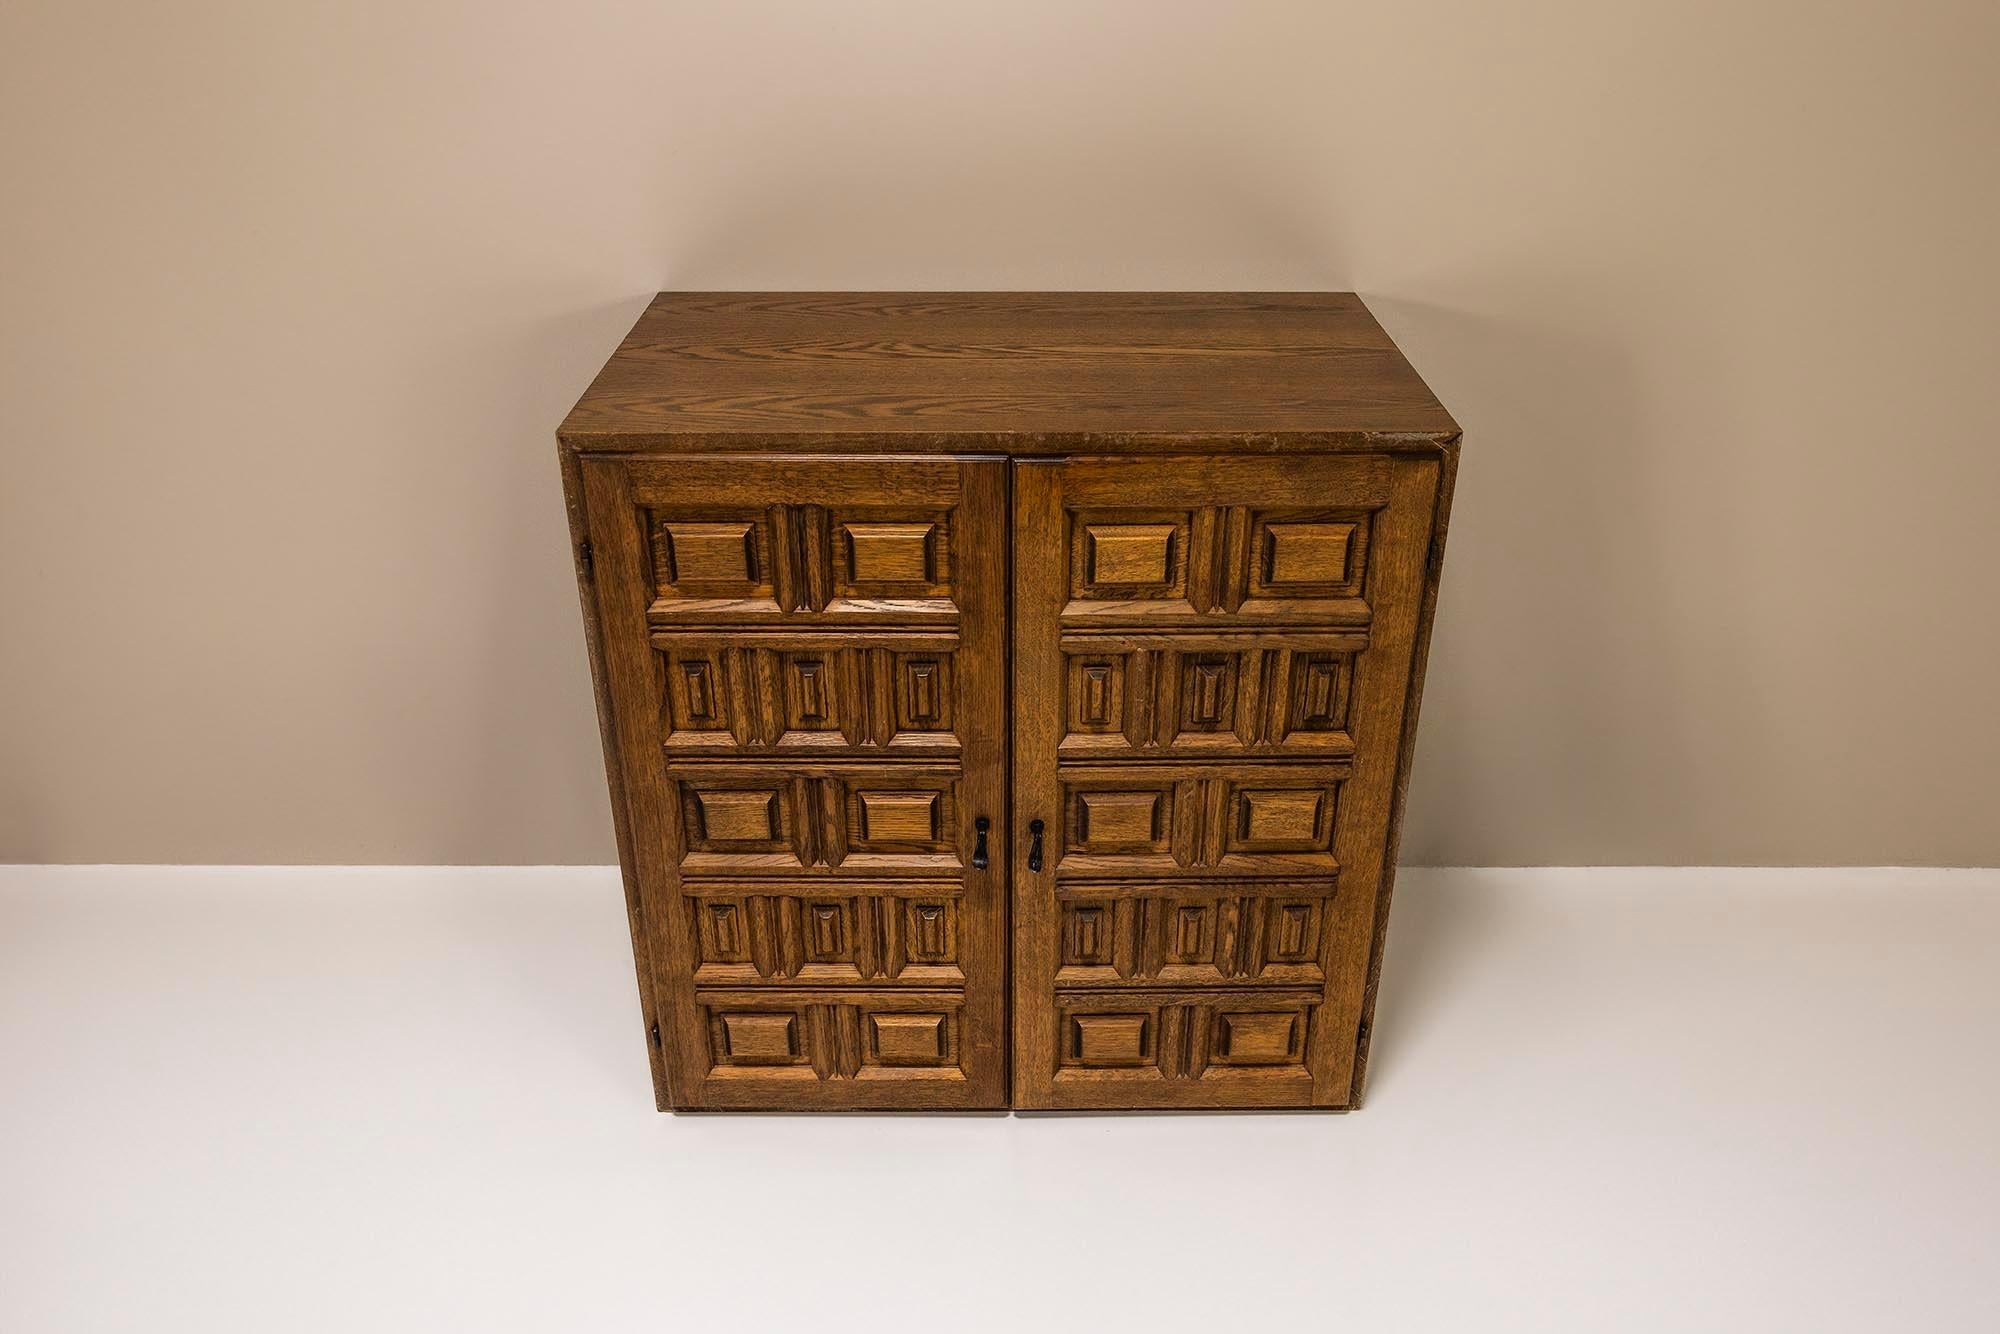 Charming small, but practical cabinet in oak. 

Design
This cabinet is in the similar style as the Spanish brutalist side- and lowboard. The graphical details on the fronts of the cabinets are similar to the sideboard and consist of both horizontal